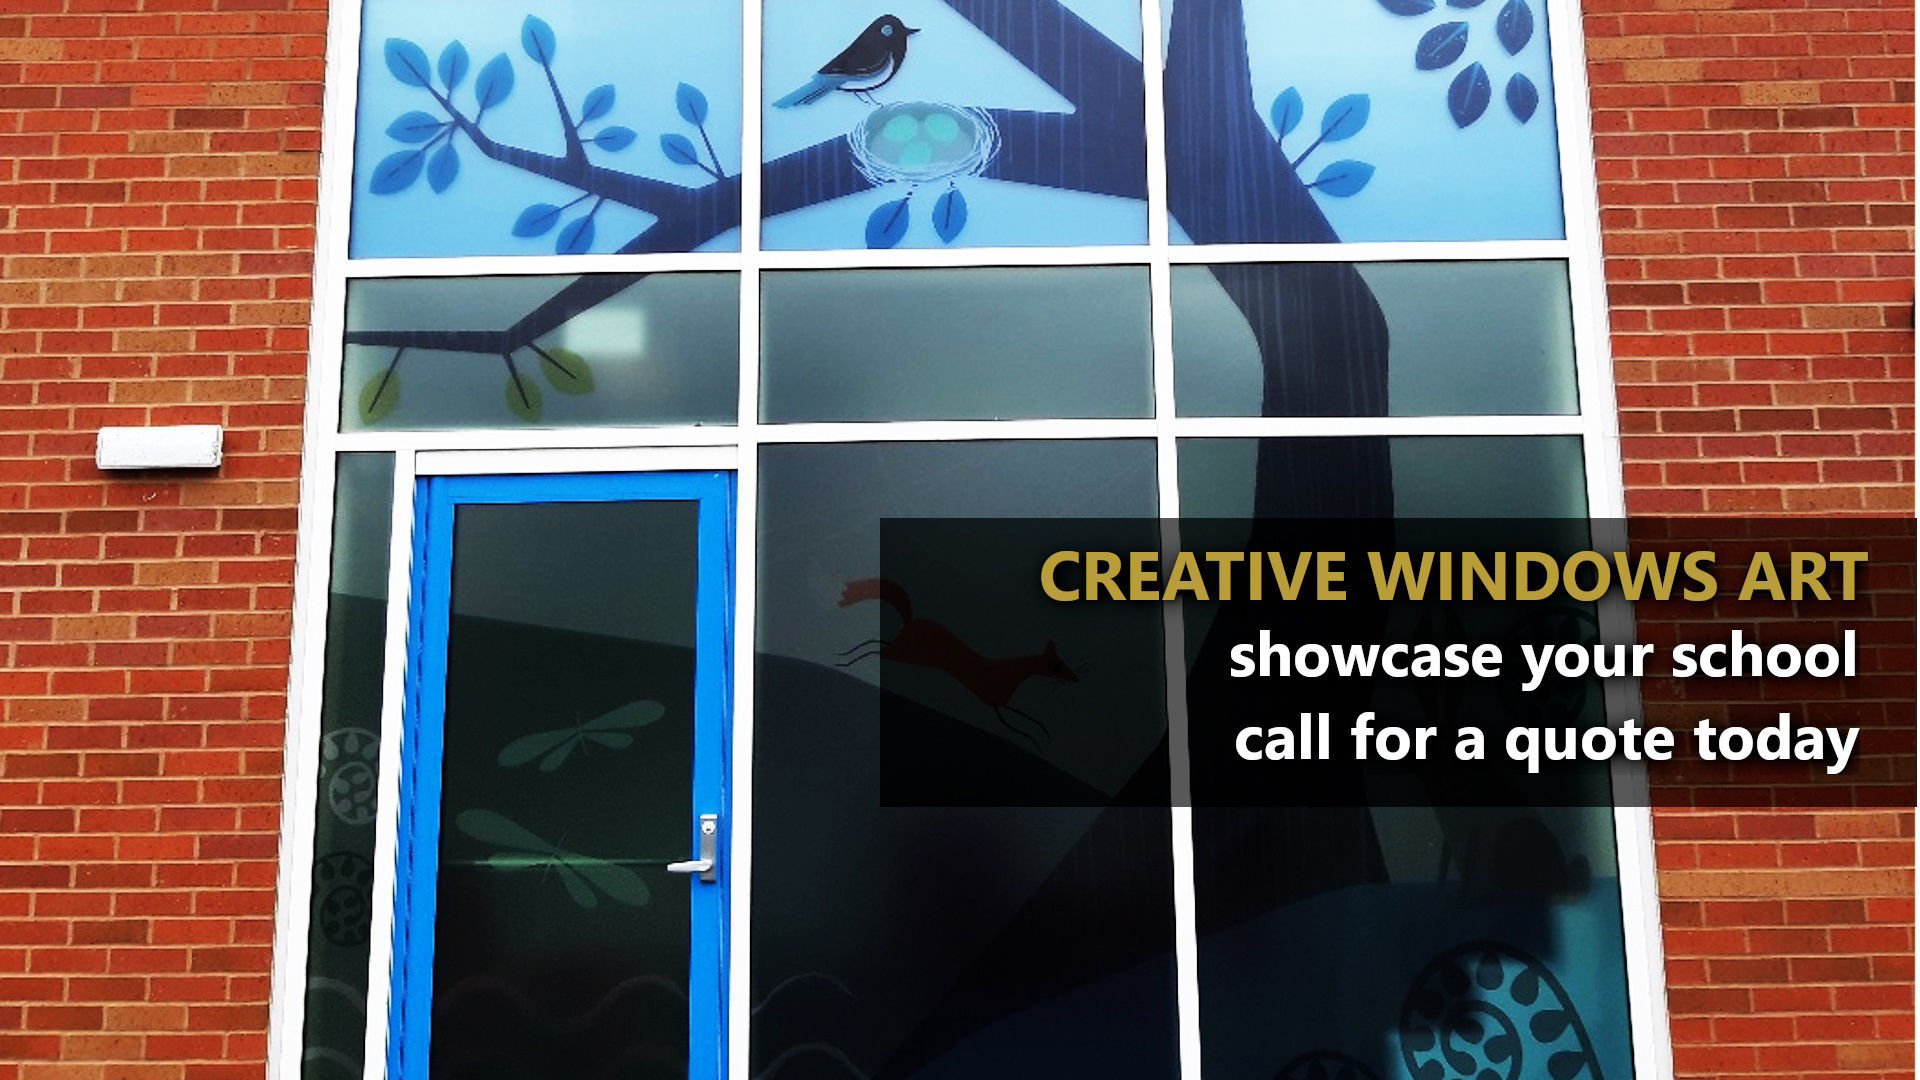 CREATIVE WINDOWS ART. Showcase your school. Call for a quote today.